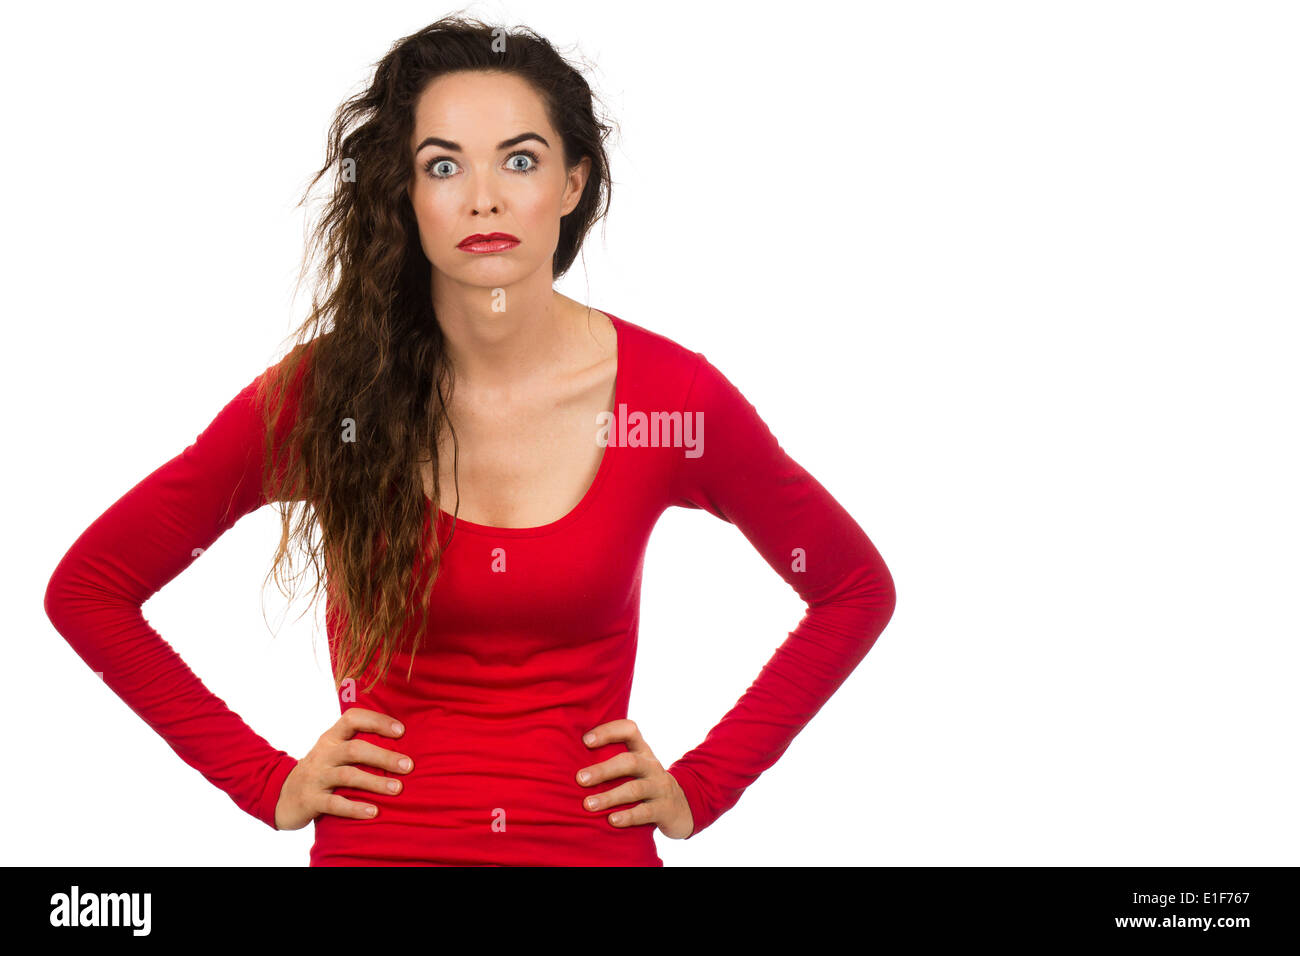 A tired, frustrated and fed up woman looking at camera. Isolated on white. Stock Photo